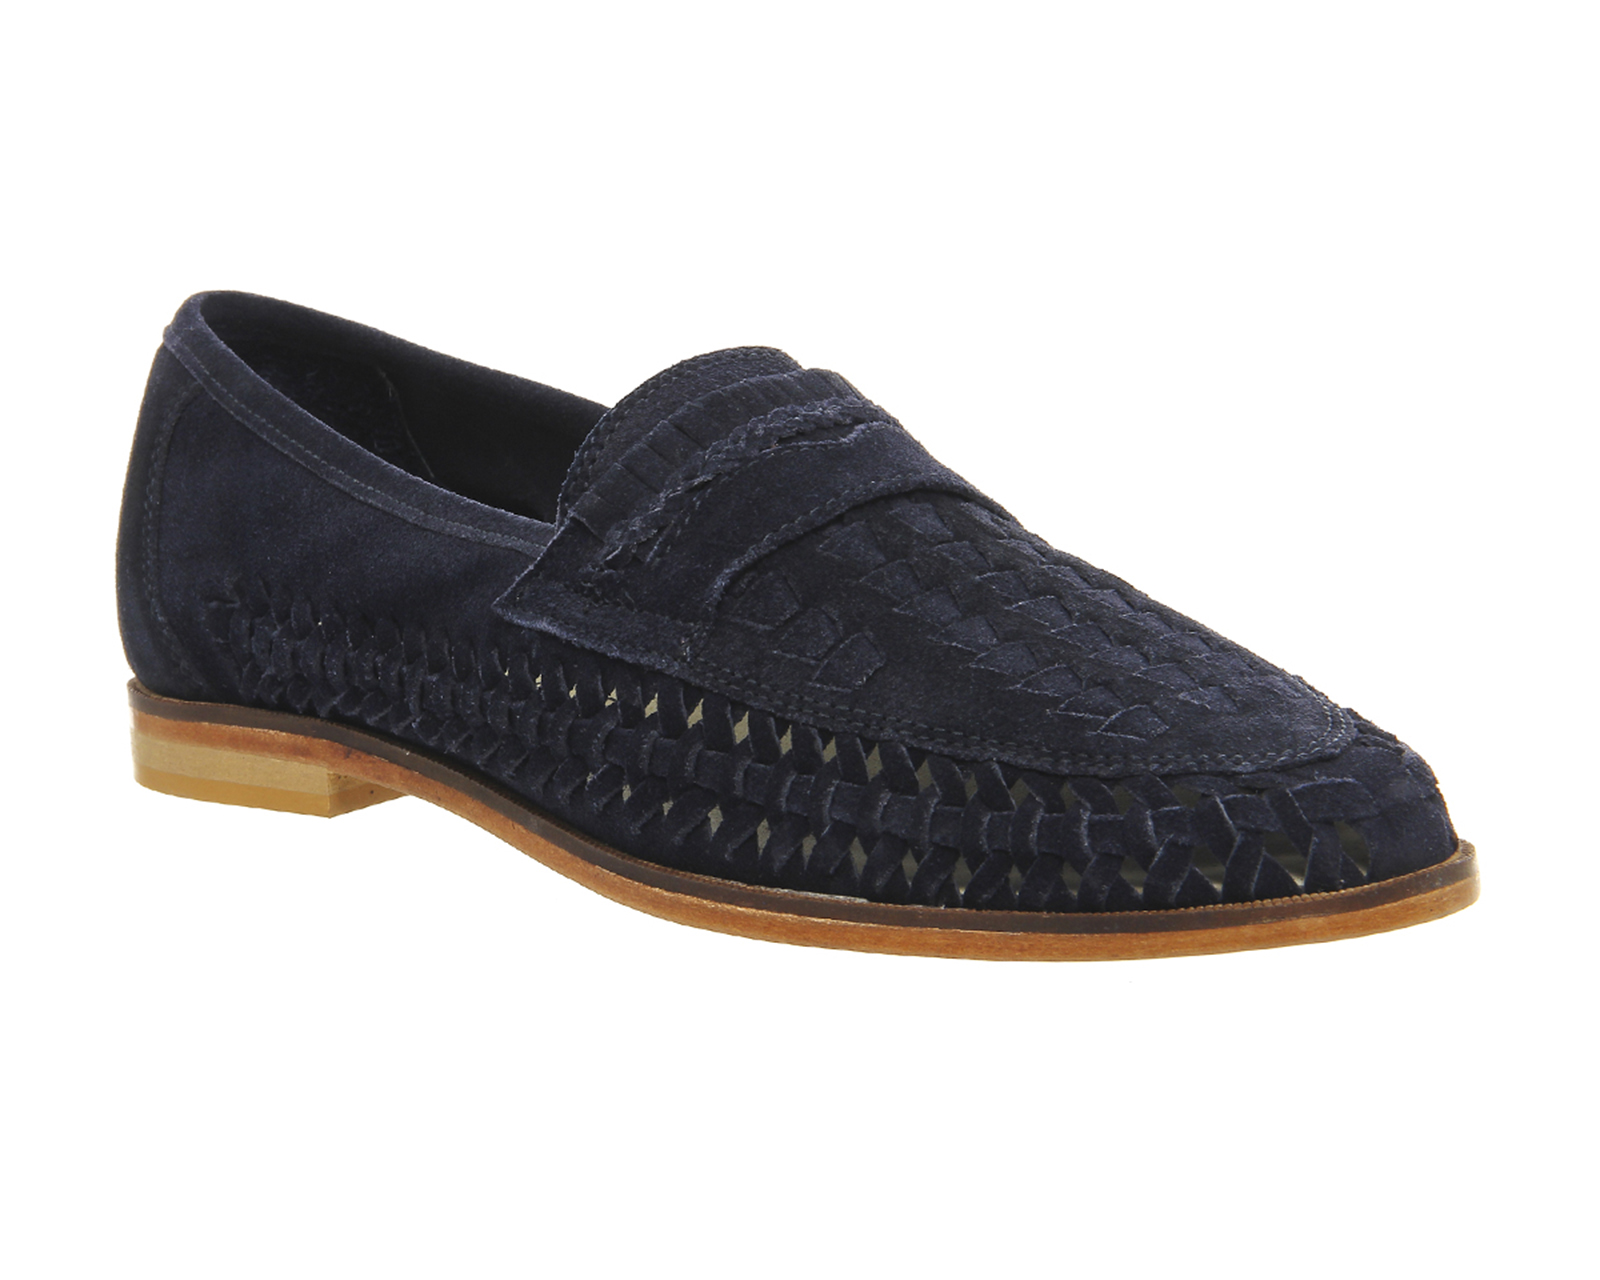 OFFICEBow Weave Slip On LoafersNavy Suede